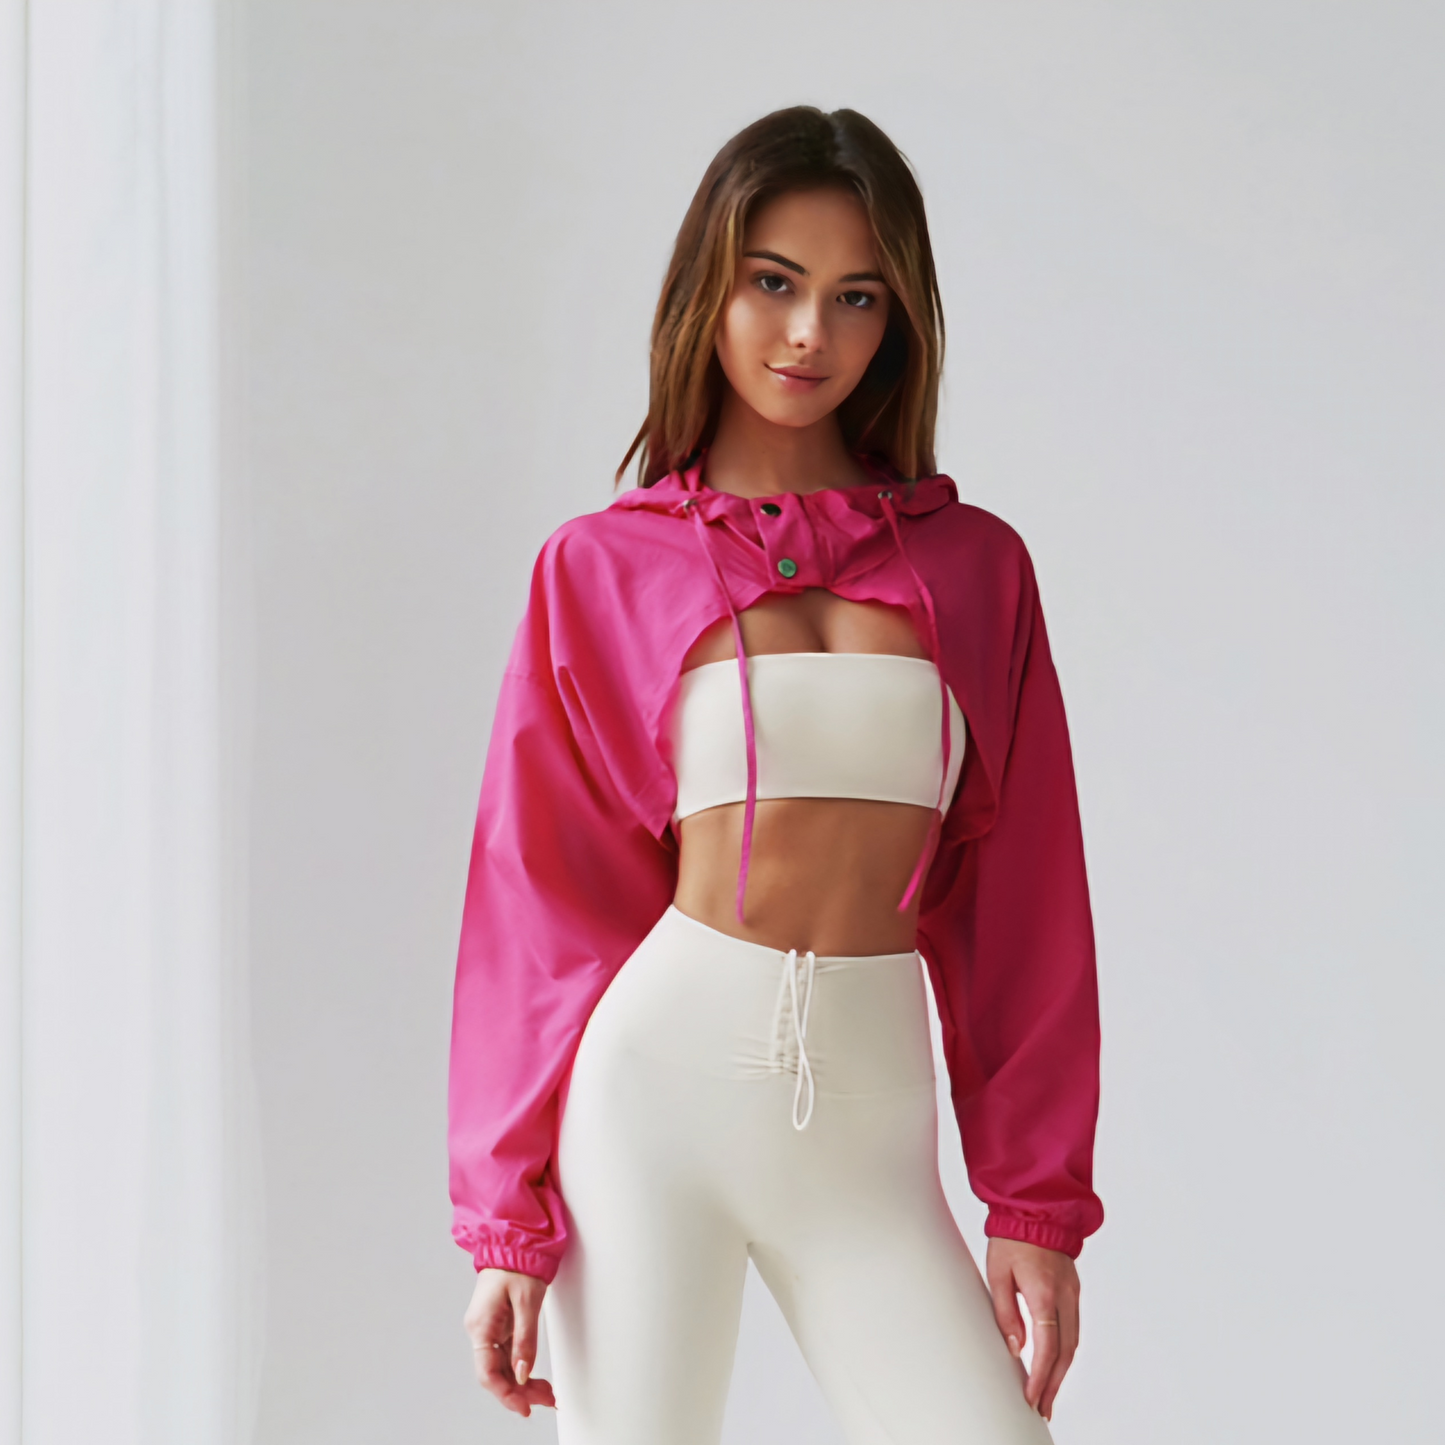 Fitness model wearing a hot pink Ella jacket from Vibras Activewear.